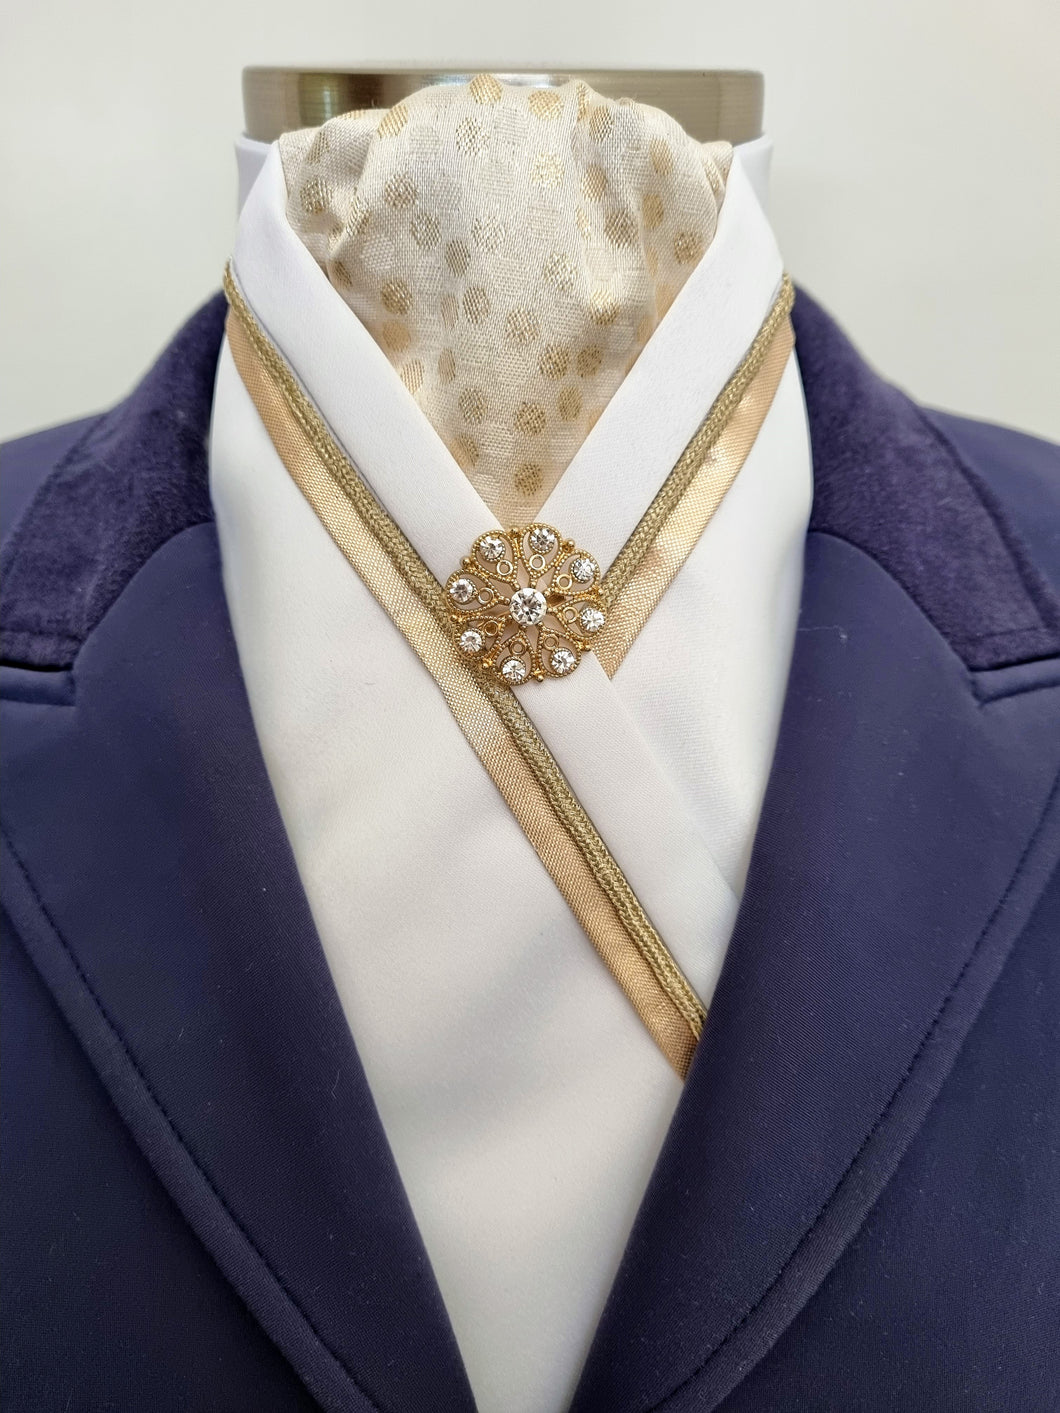 ERA RACHAEL STOCK TIE - White satin with gold metallic spot brocade, trim, piping and brooch